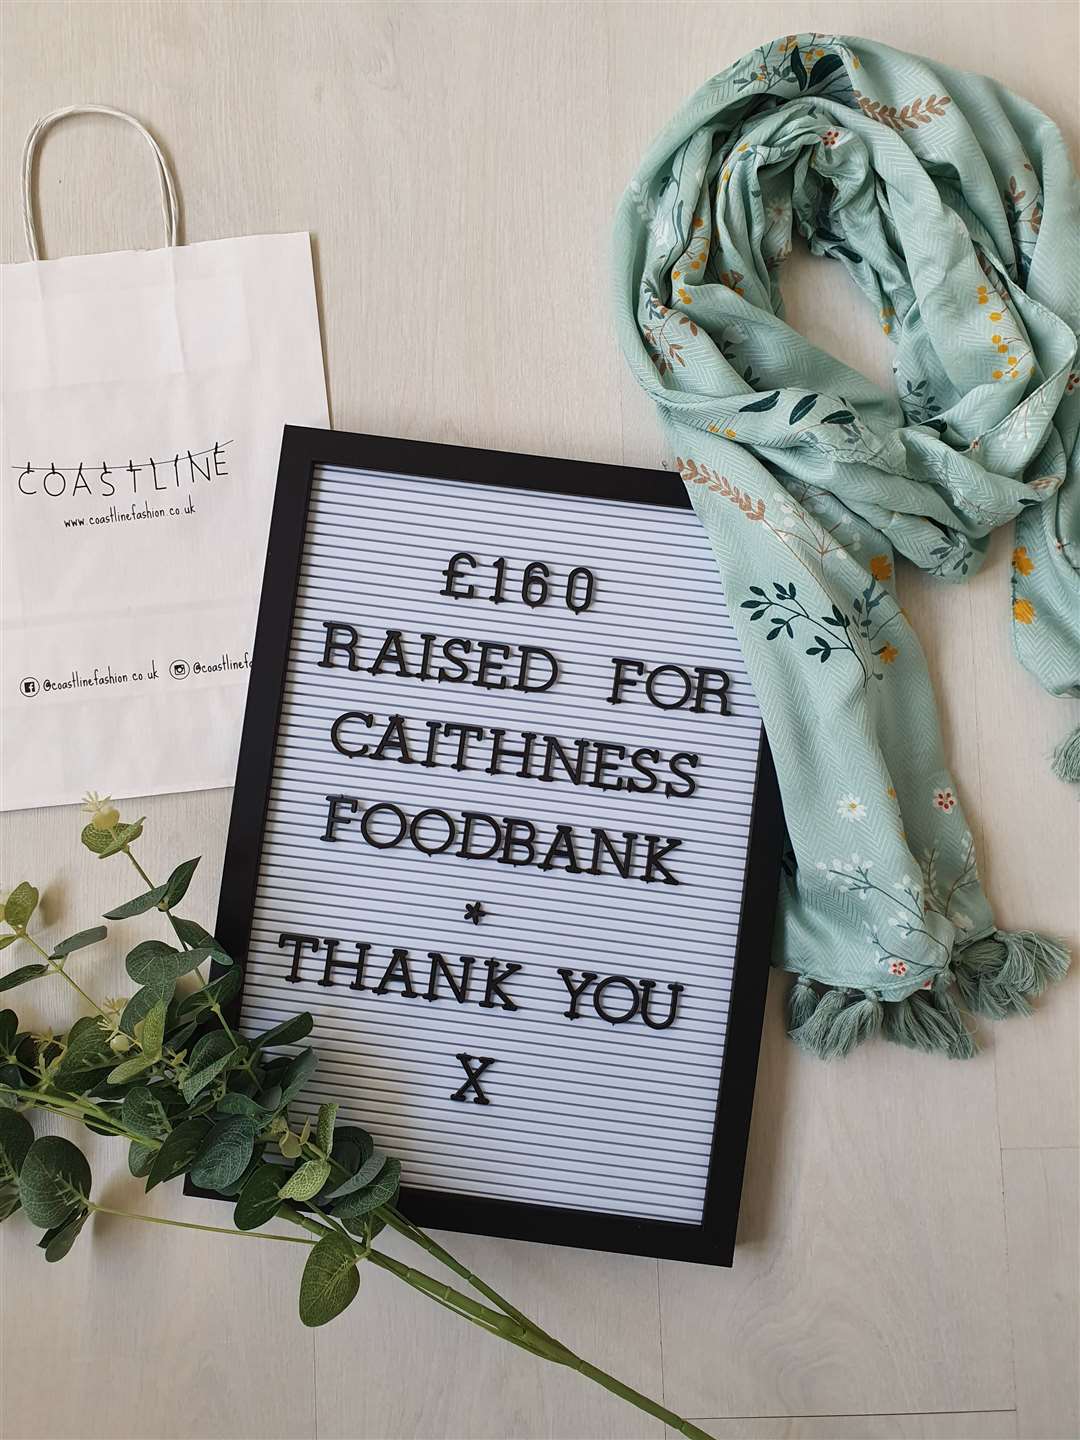 A thank you to the Caithness Foodbank from Lesley-Ann Sutherland of Coastline.